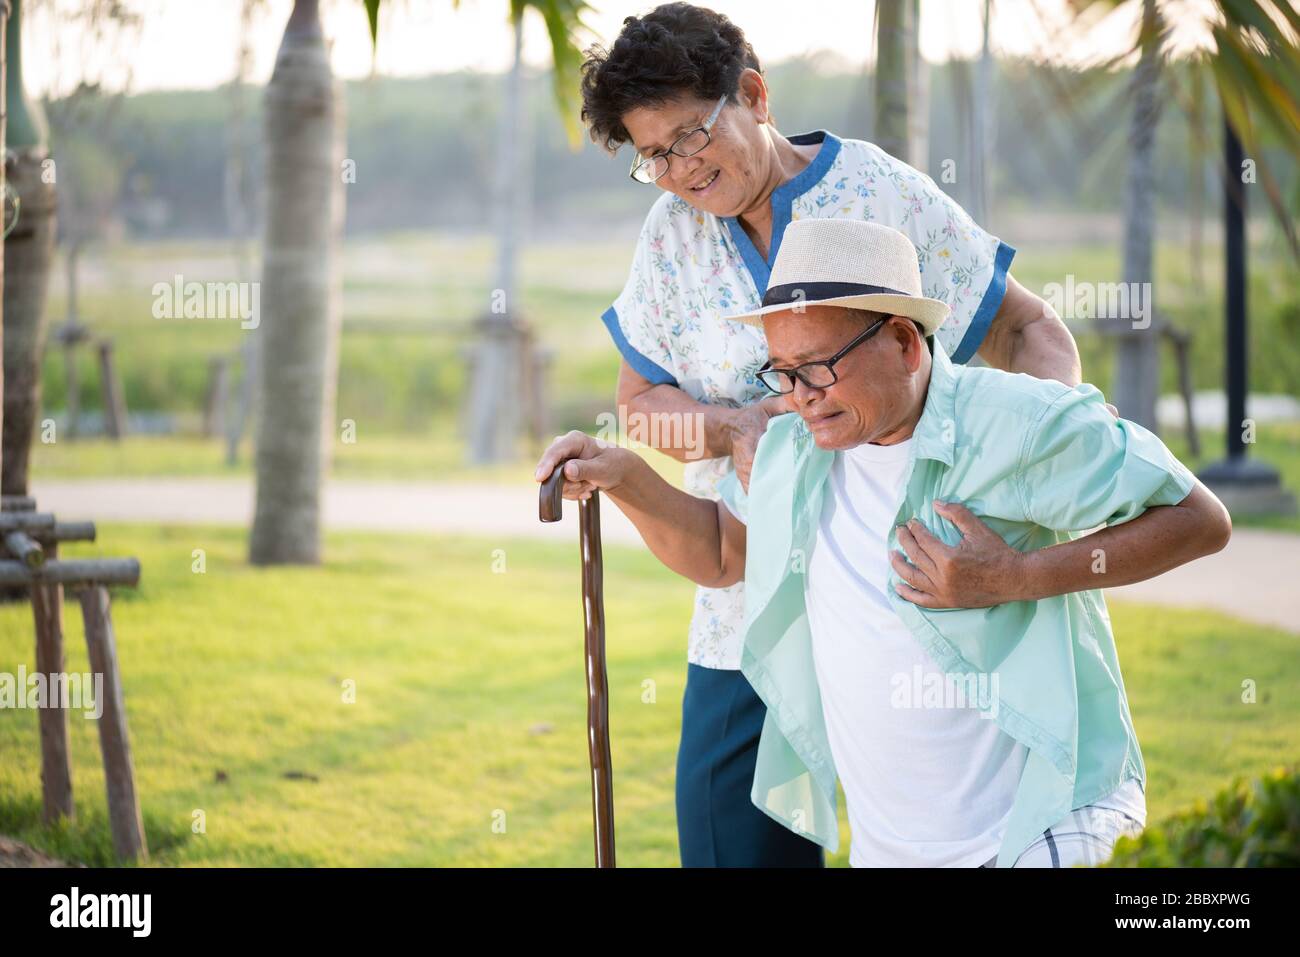 Asian old woman helping an elderly man having having a pain on heart, heart attack in a park. Senior healthcare concept. Stock Photo